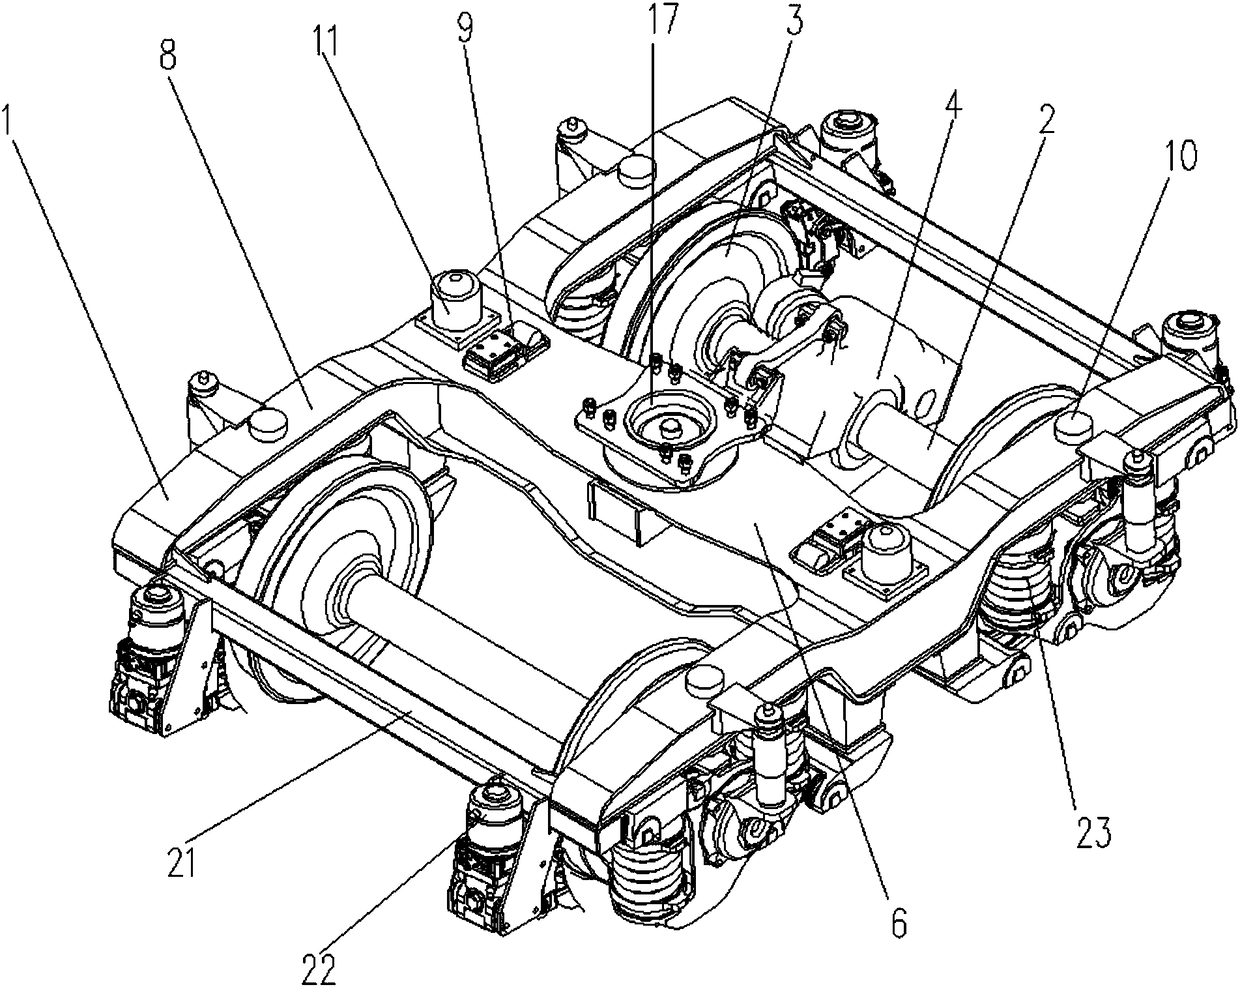 Two-axle bogie with locking function